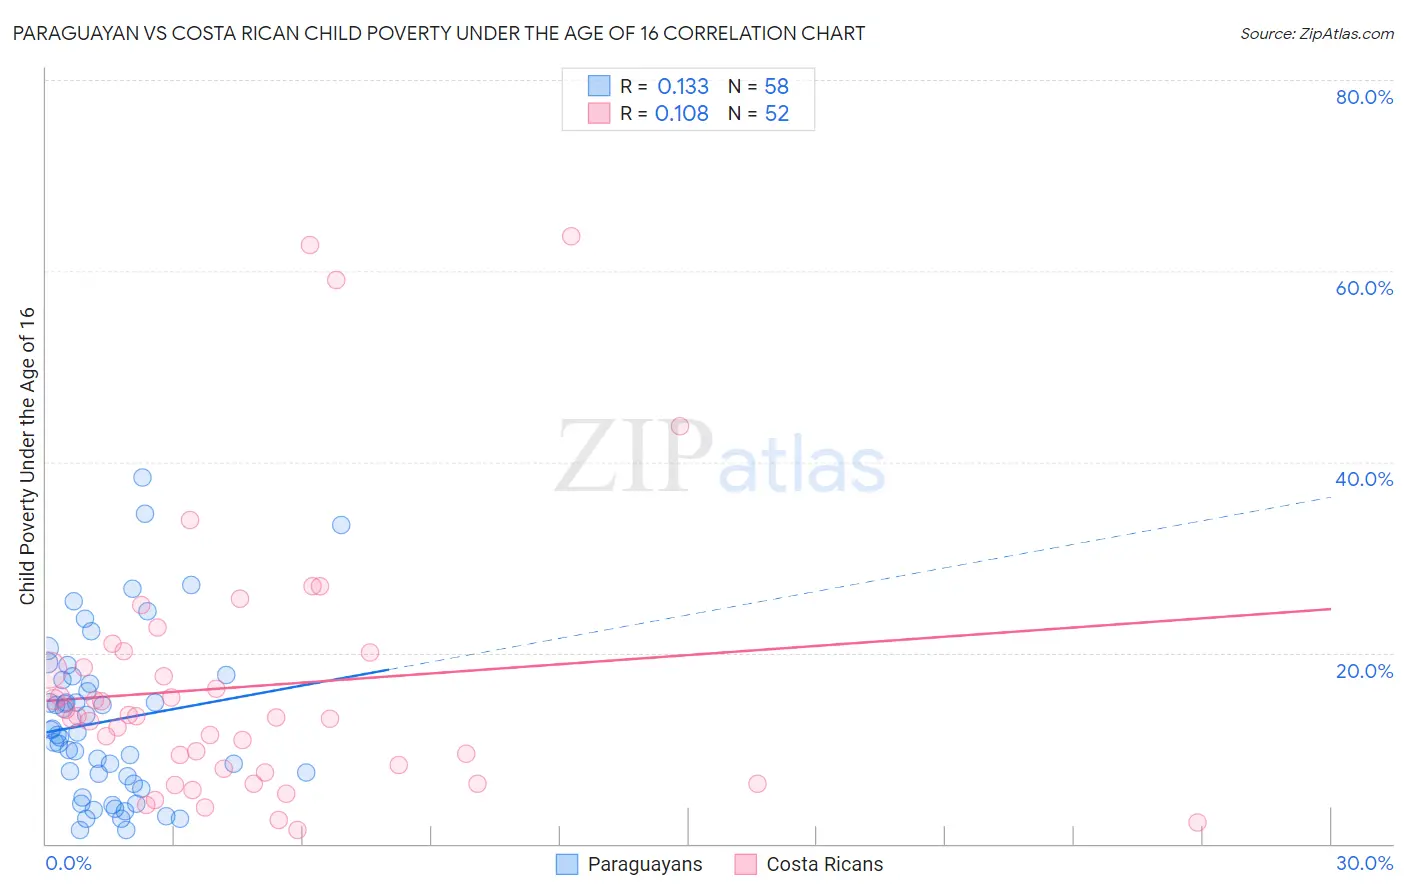 Paraguayan vs Costa Rican Child Poverty Under the Age of 16